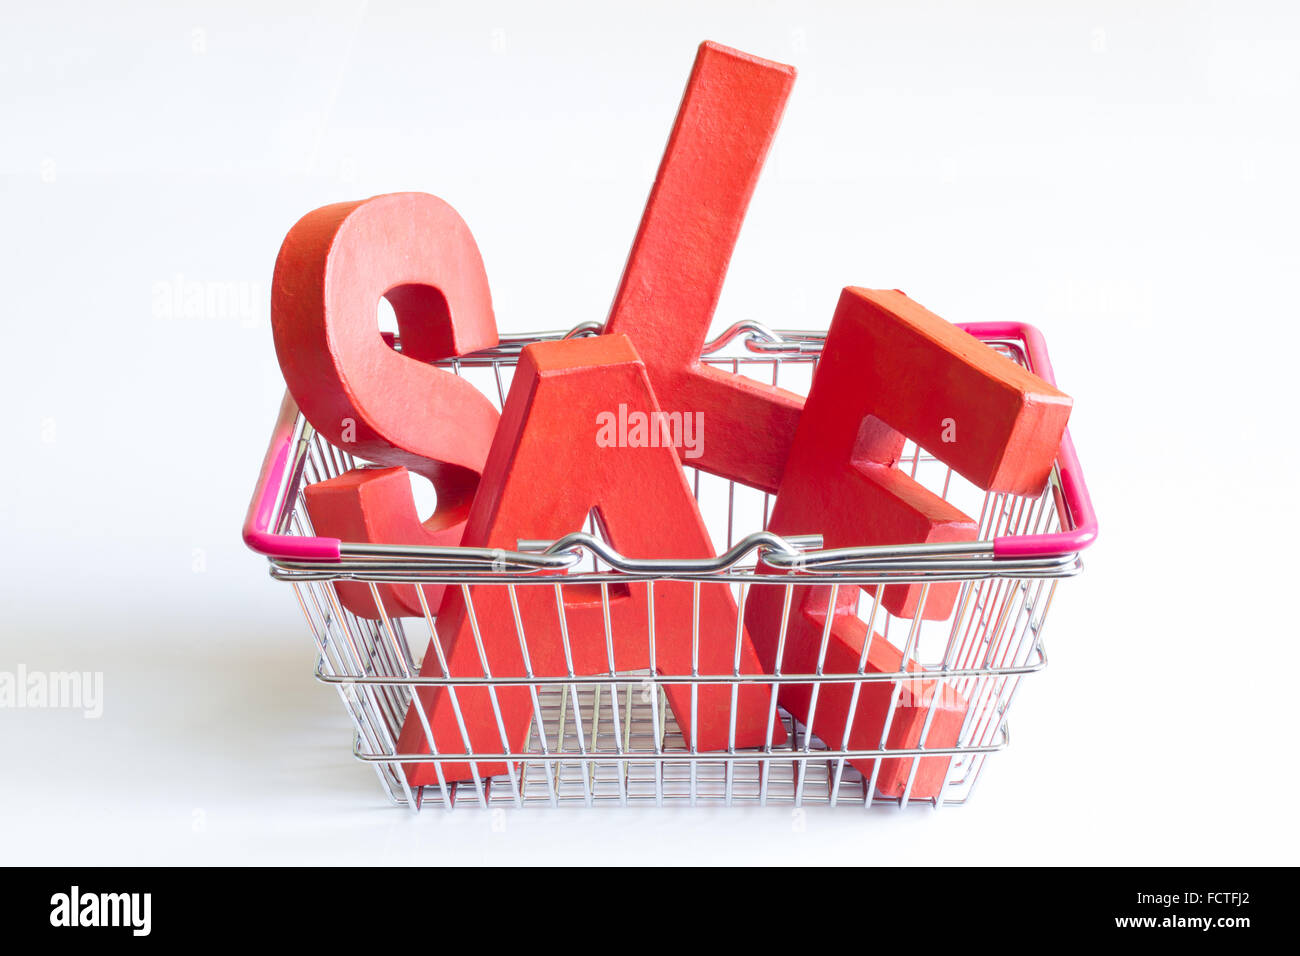 Sale red letters and a shopping basket on a white background Stock Photo